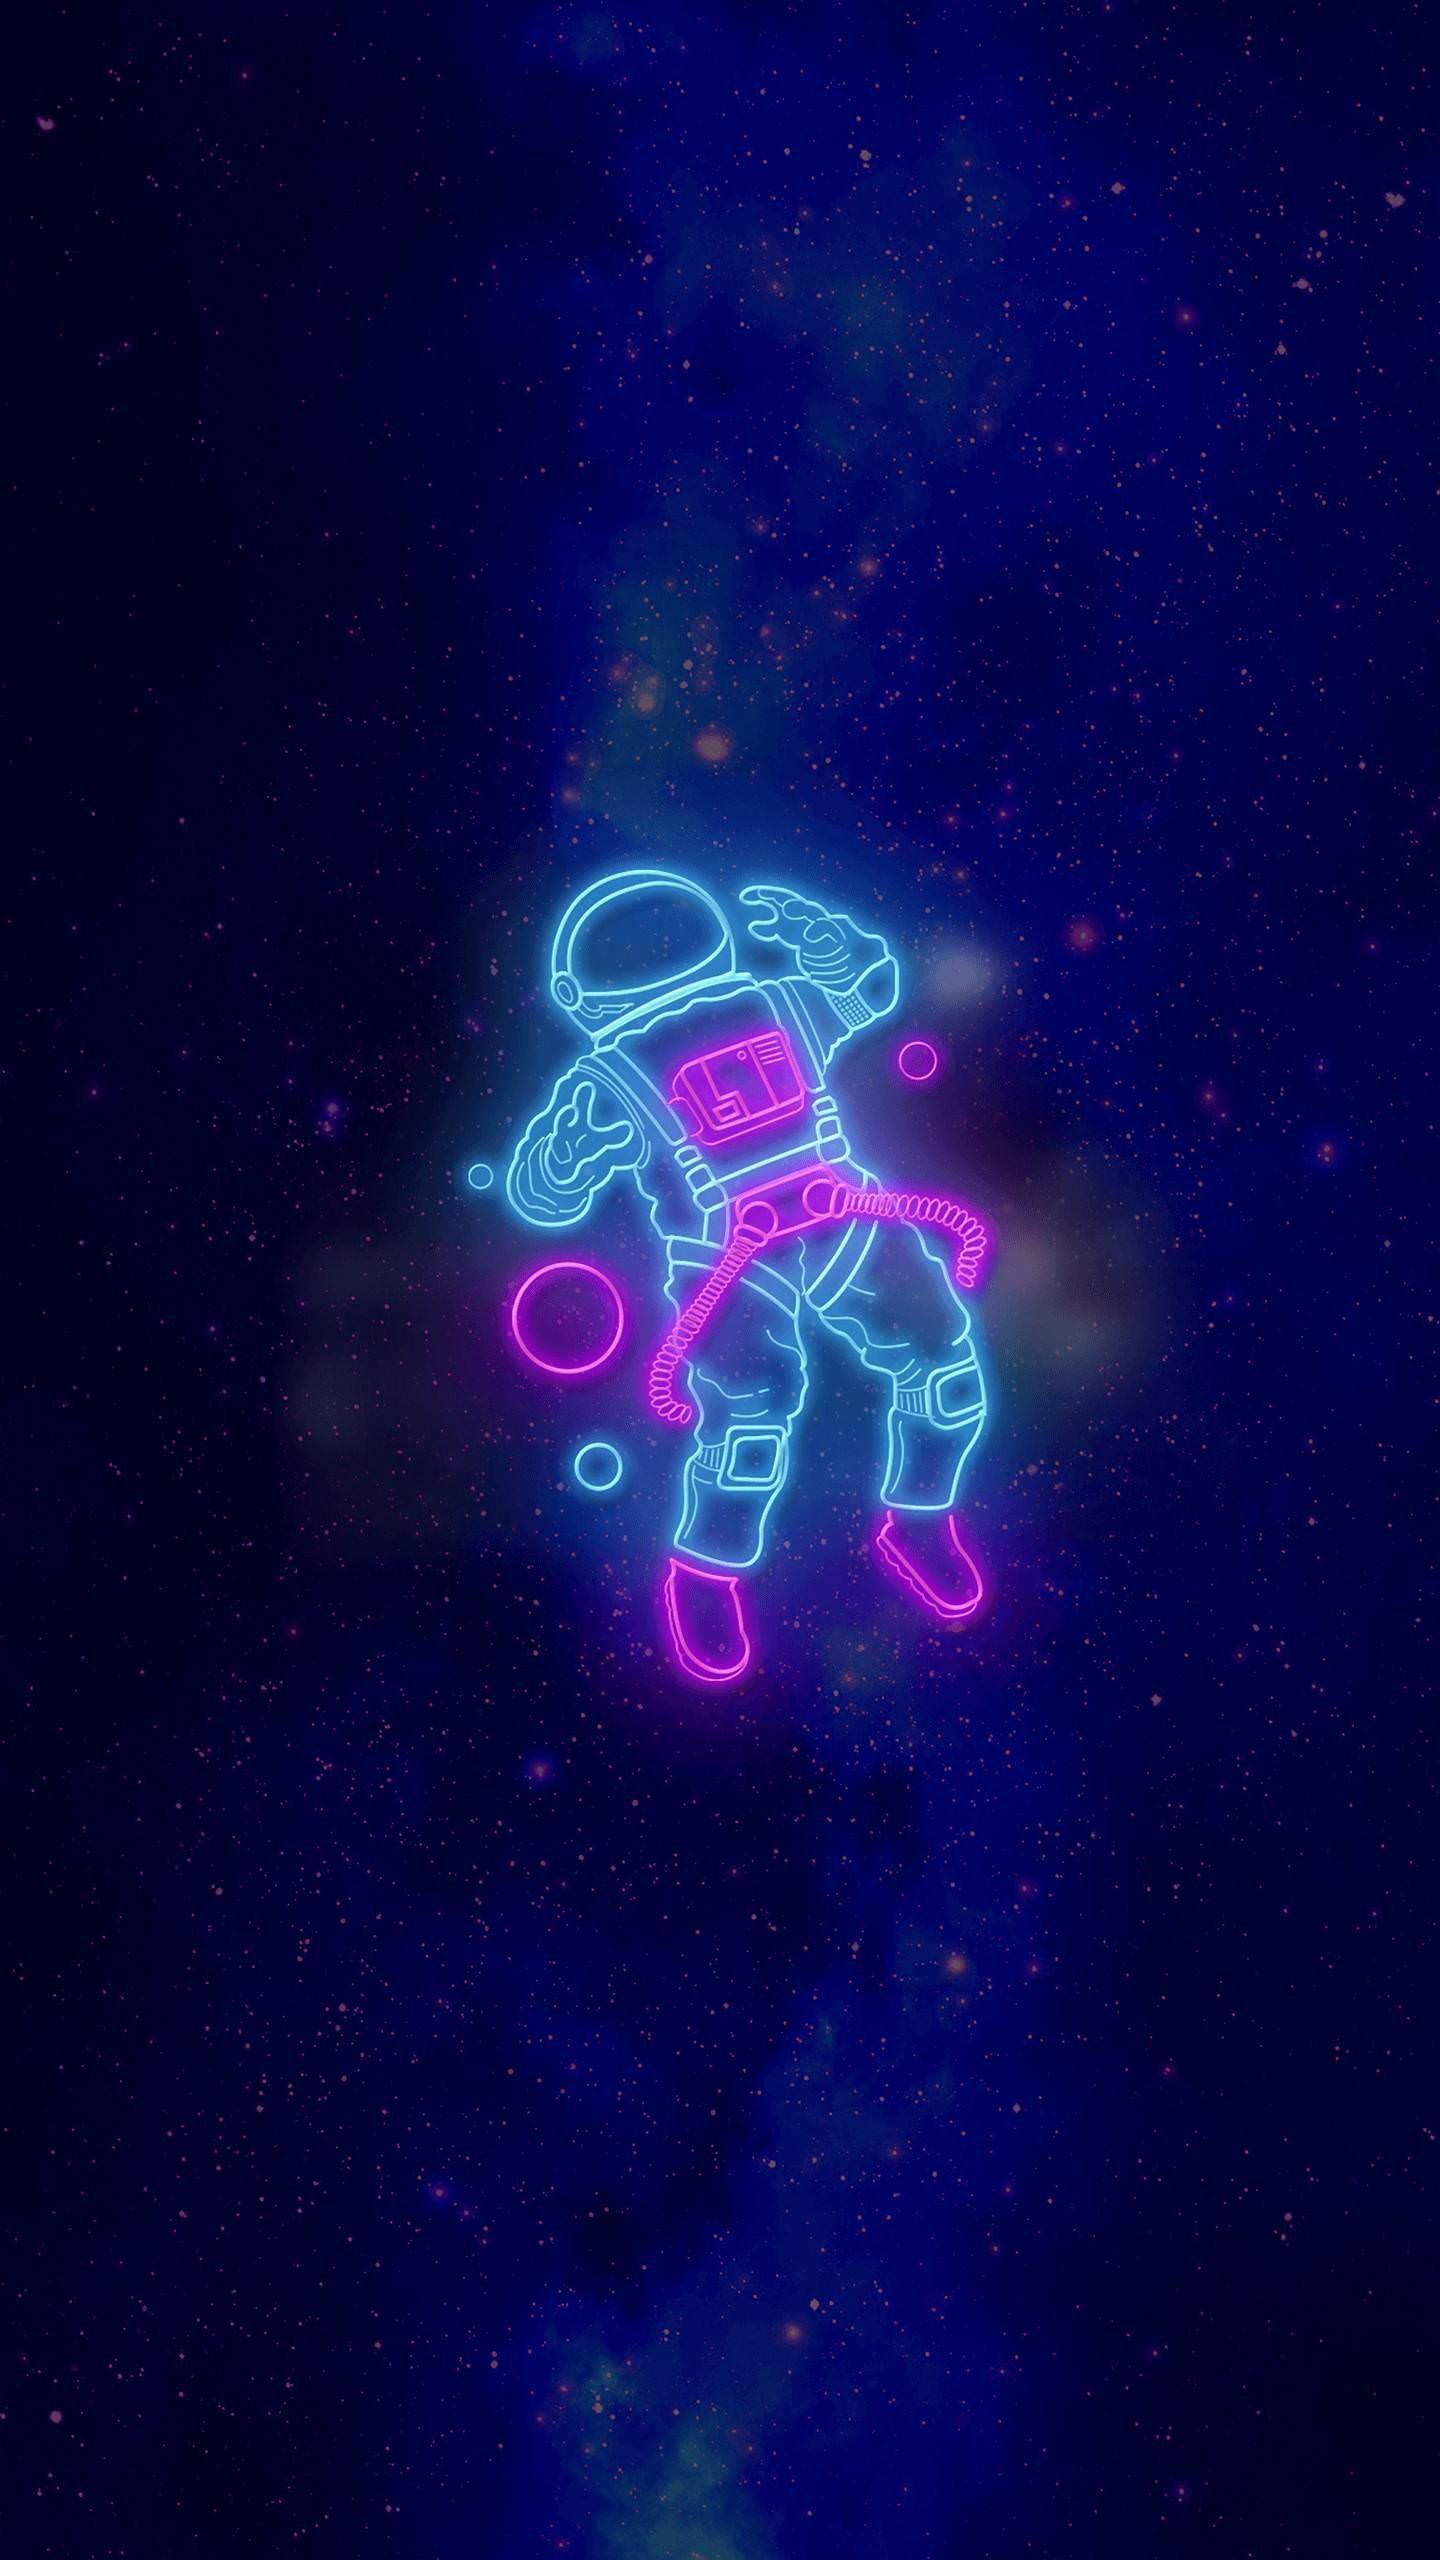 An other cool space wallpaper. This time its more retro wave